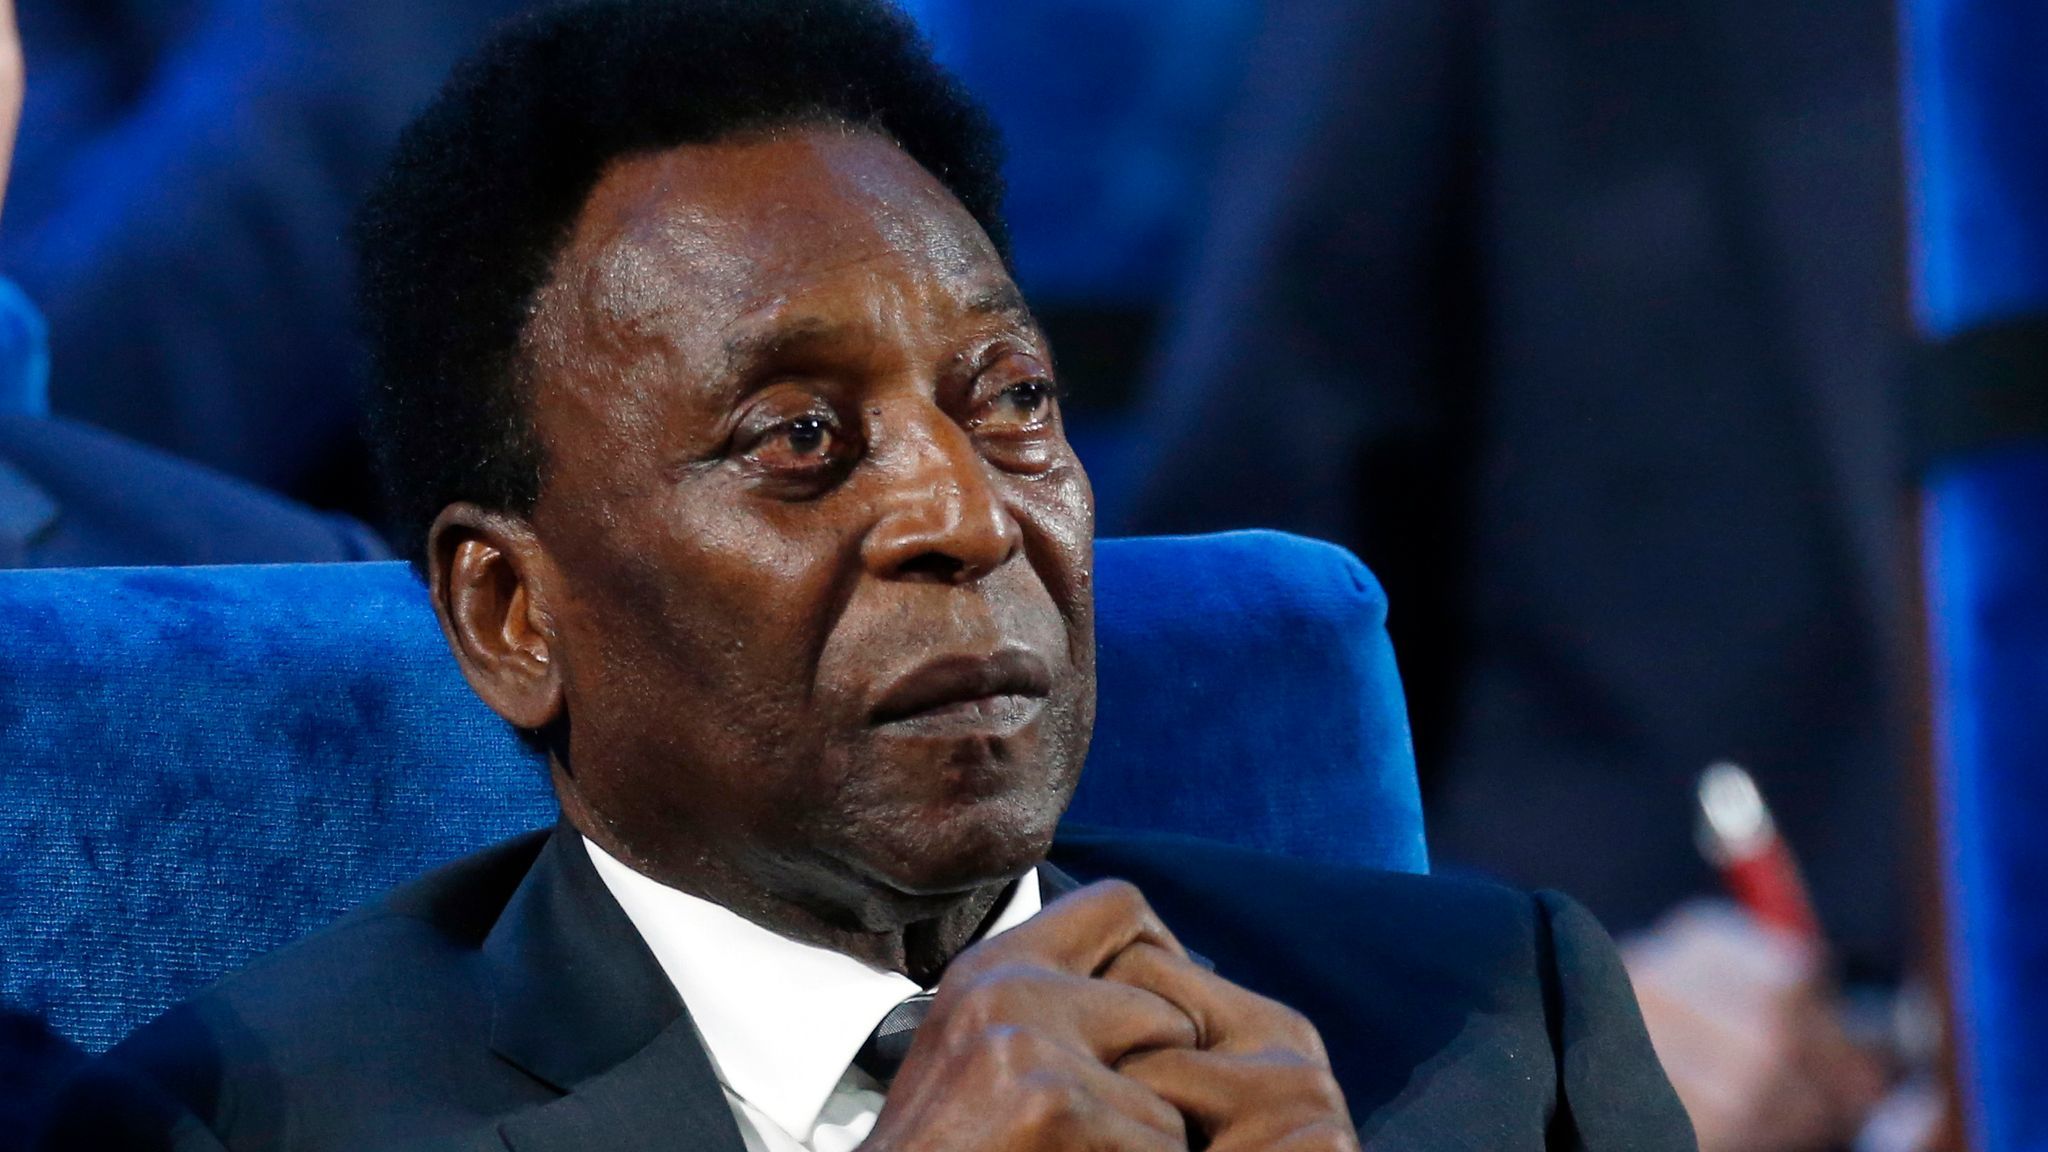 Pelé's condition worsens due to kidney and heart dysfunction